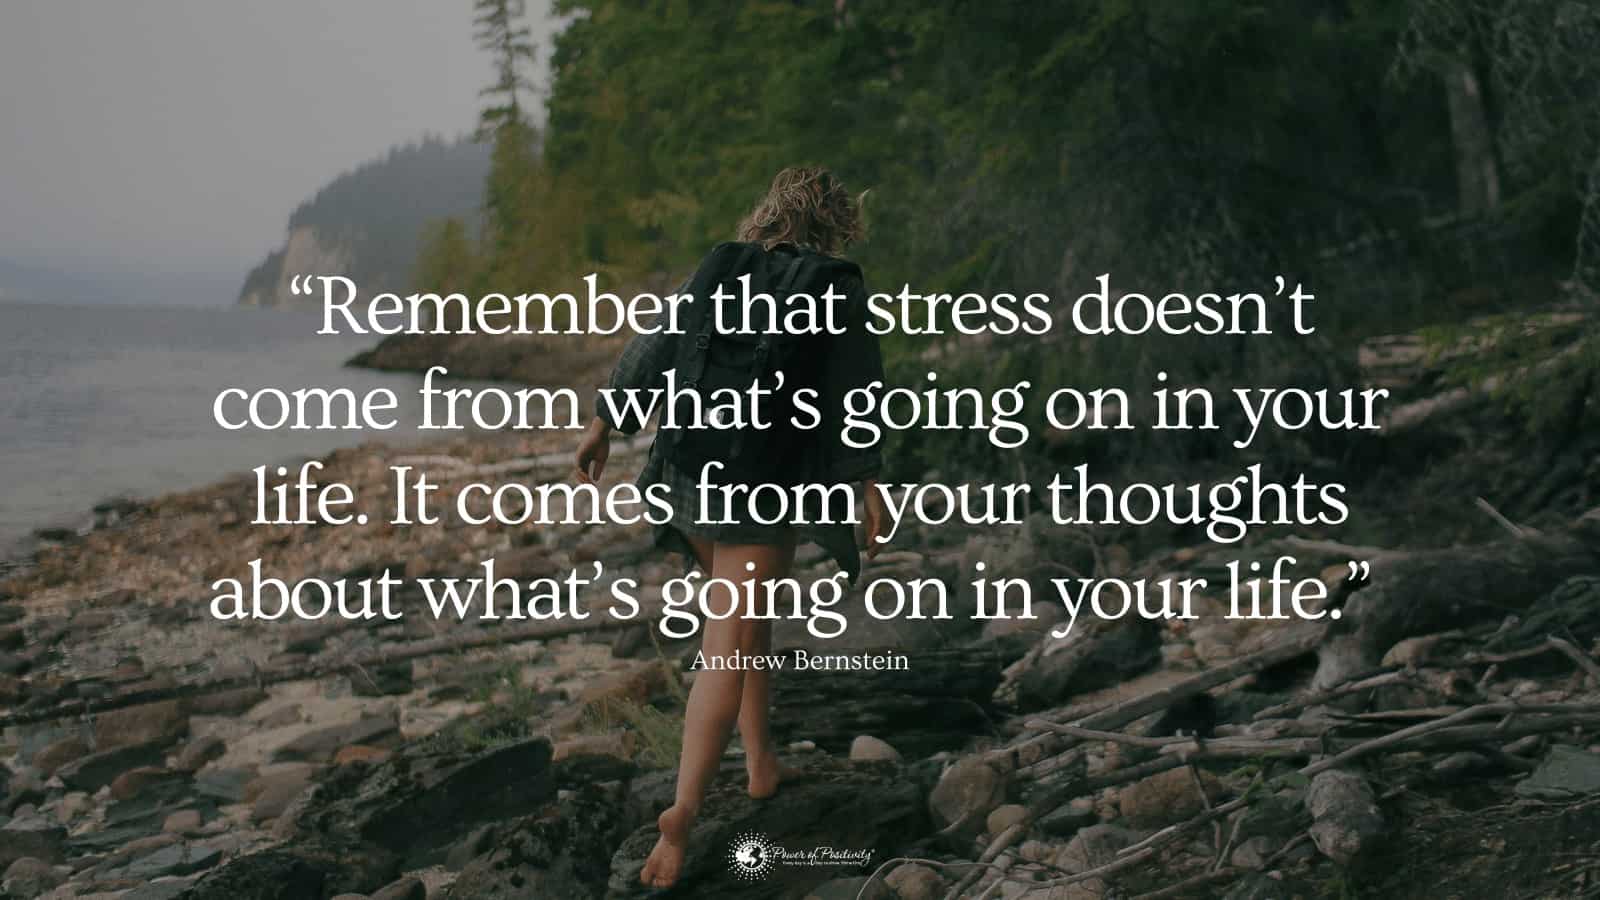 15 Quotes That Will Put Your Work Stress in Perspective